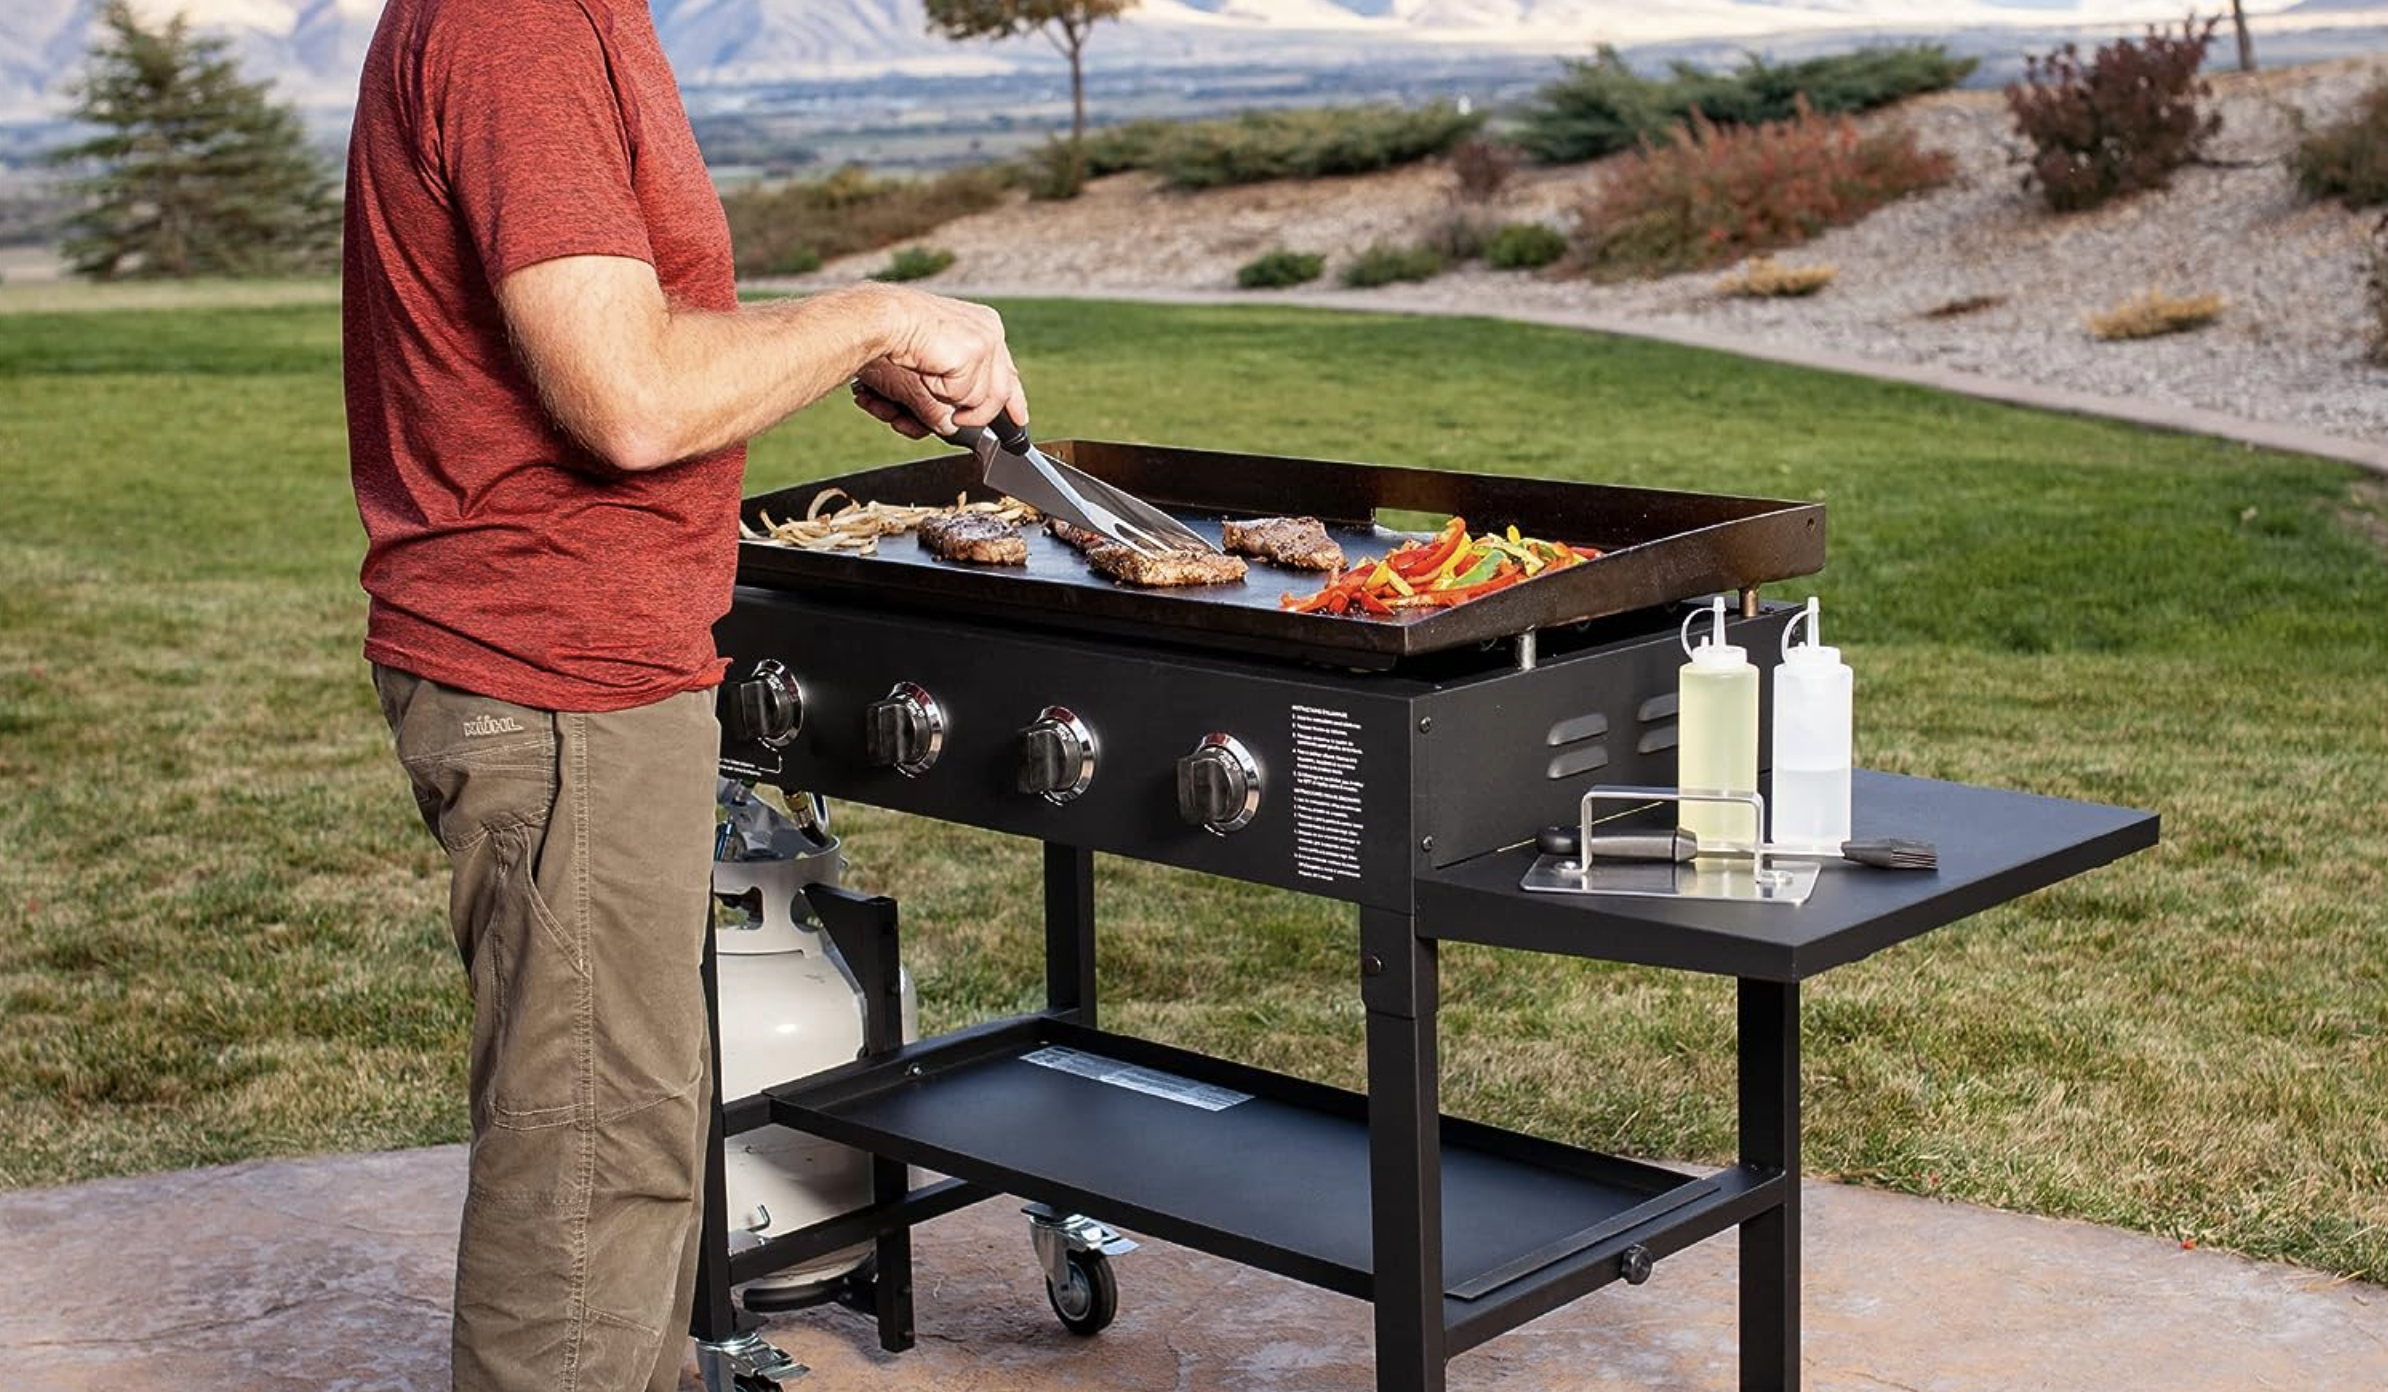 Blackstone Griddles Are a Customer Favorite on